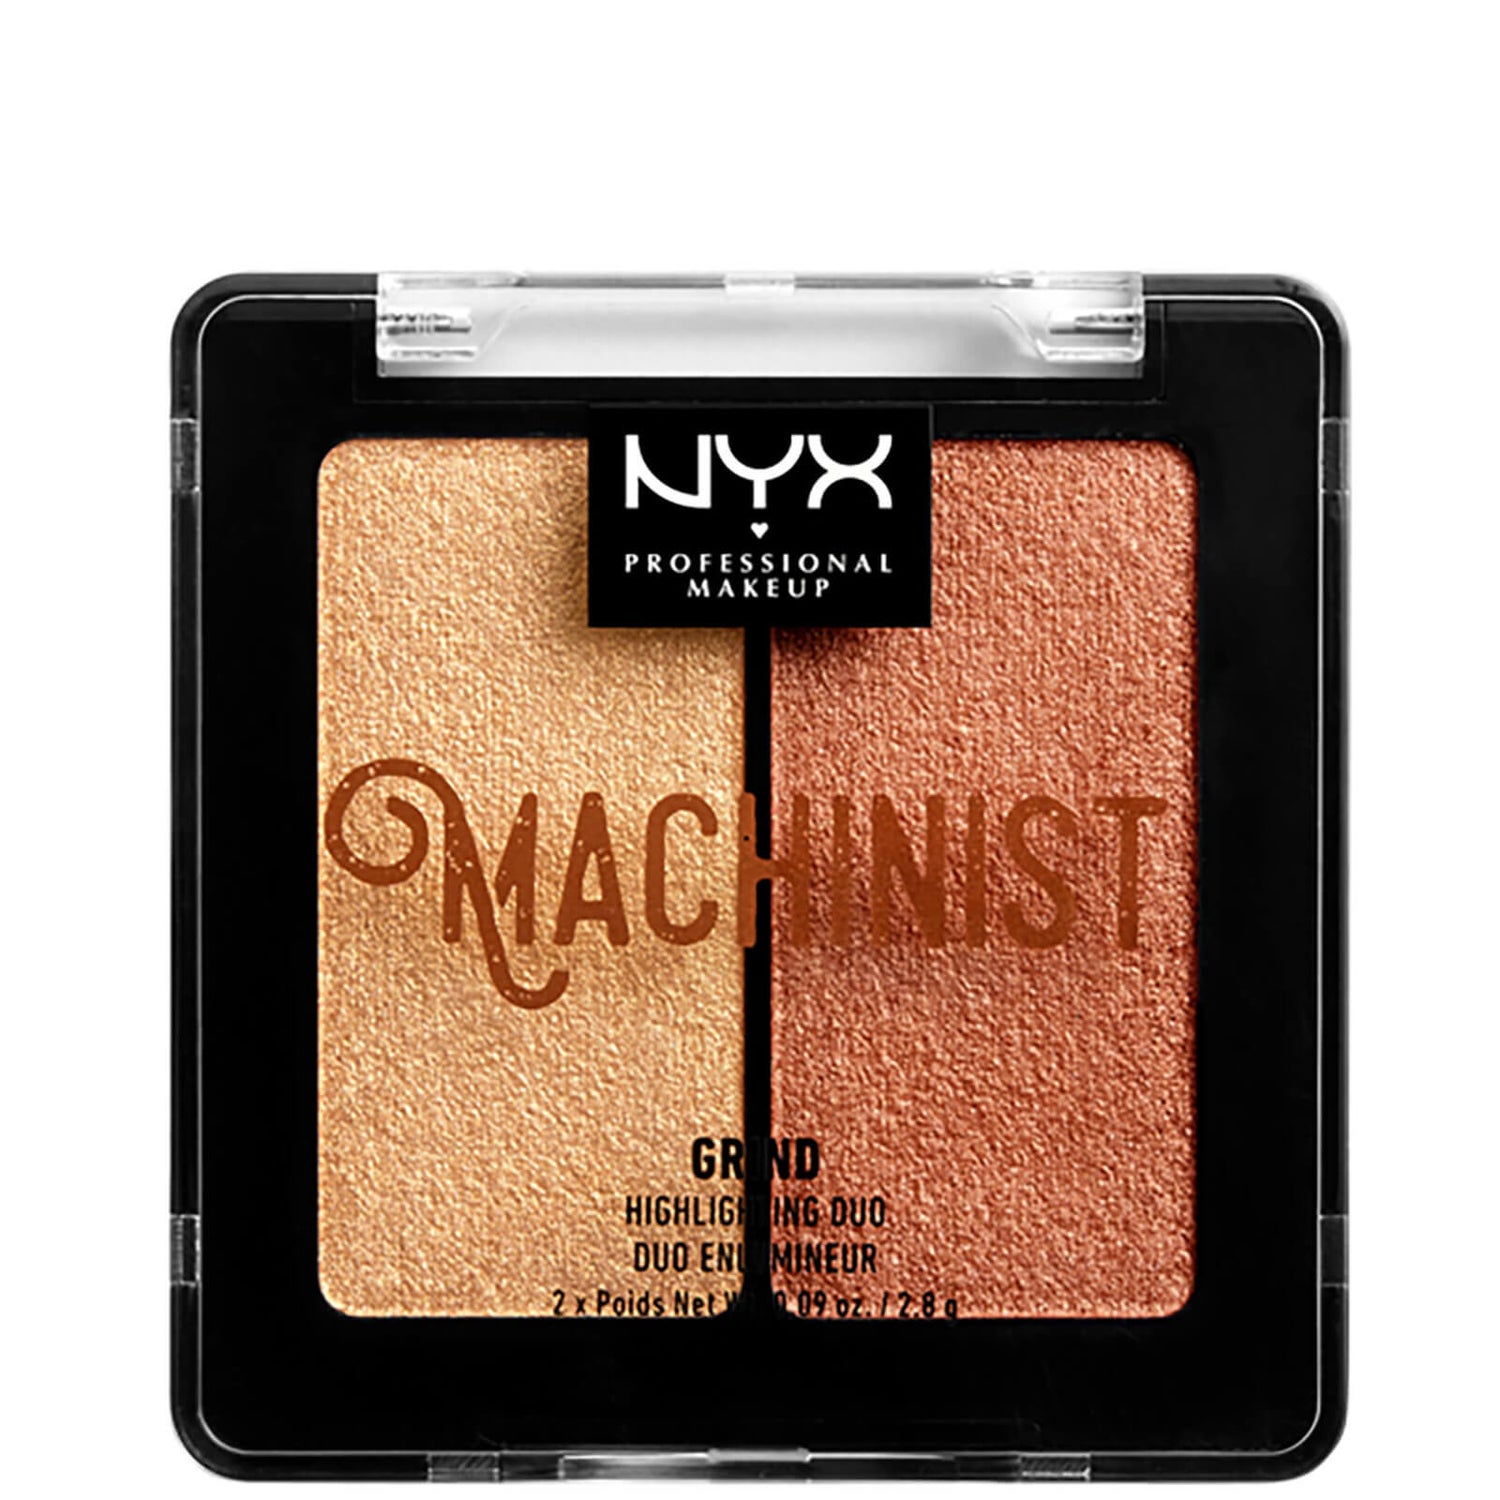 NYX Professional Makeup Machinist Highlighter Duo Kit – Grind